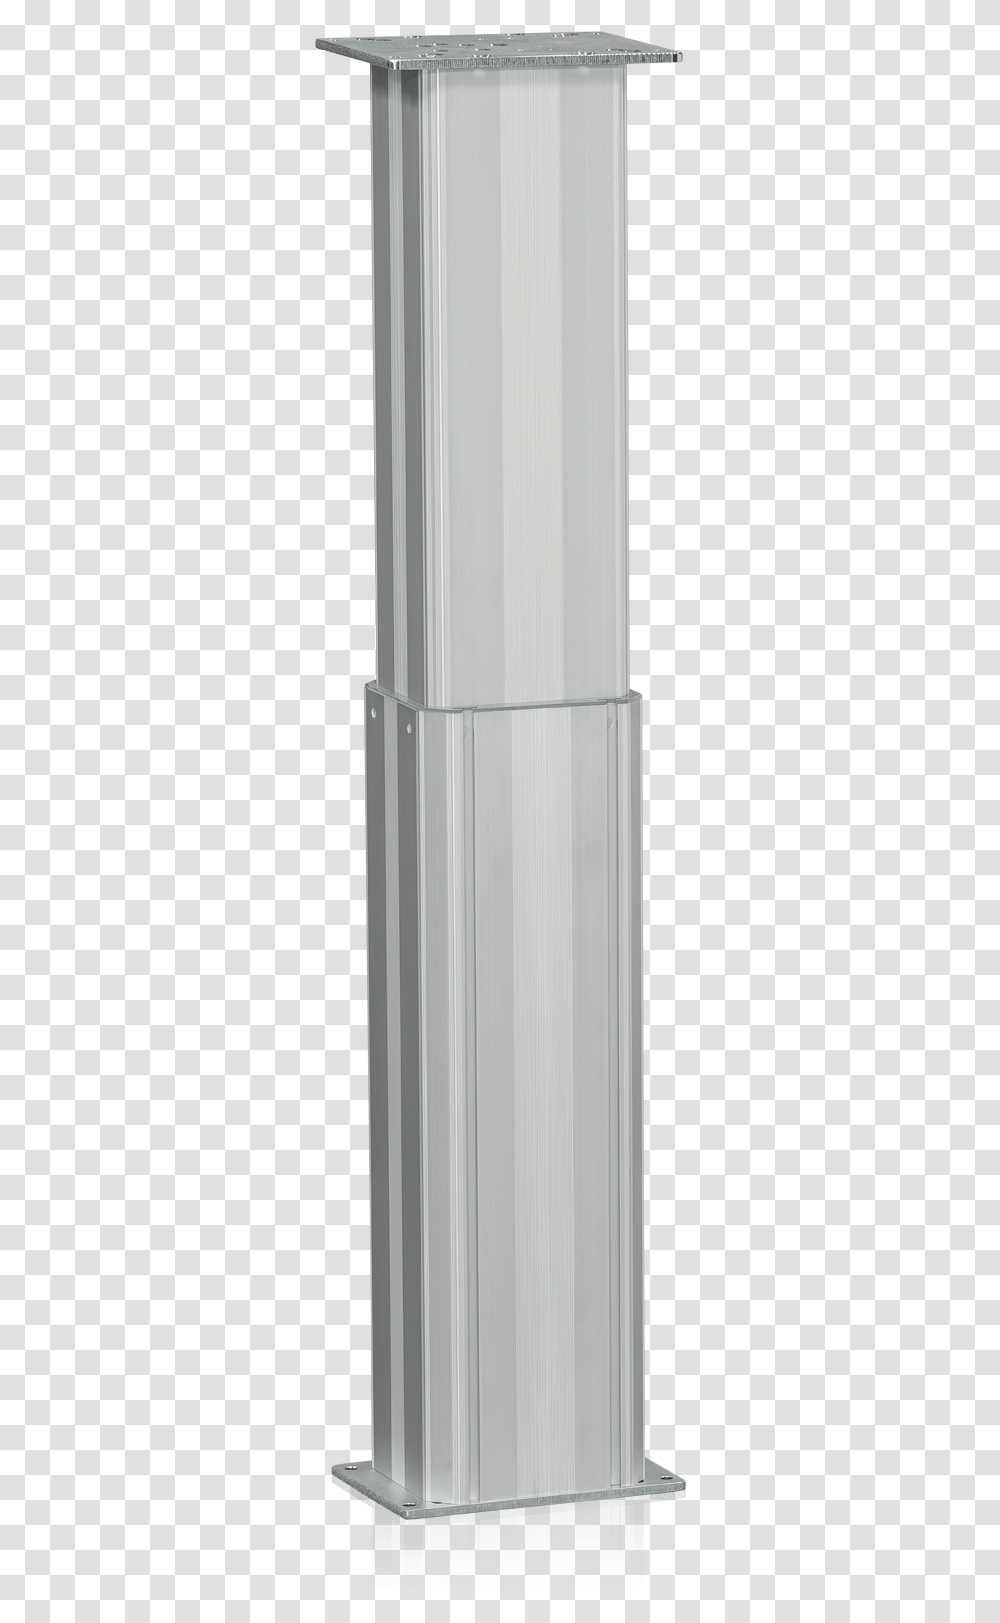 Lever, Appliance, Cylinder, Heater, Space Heater Transparent Png